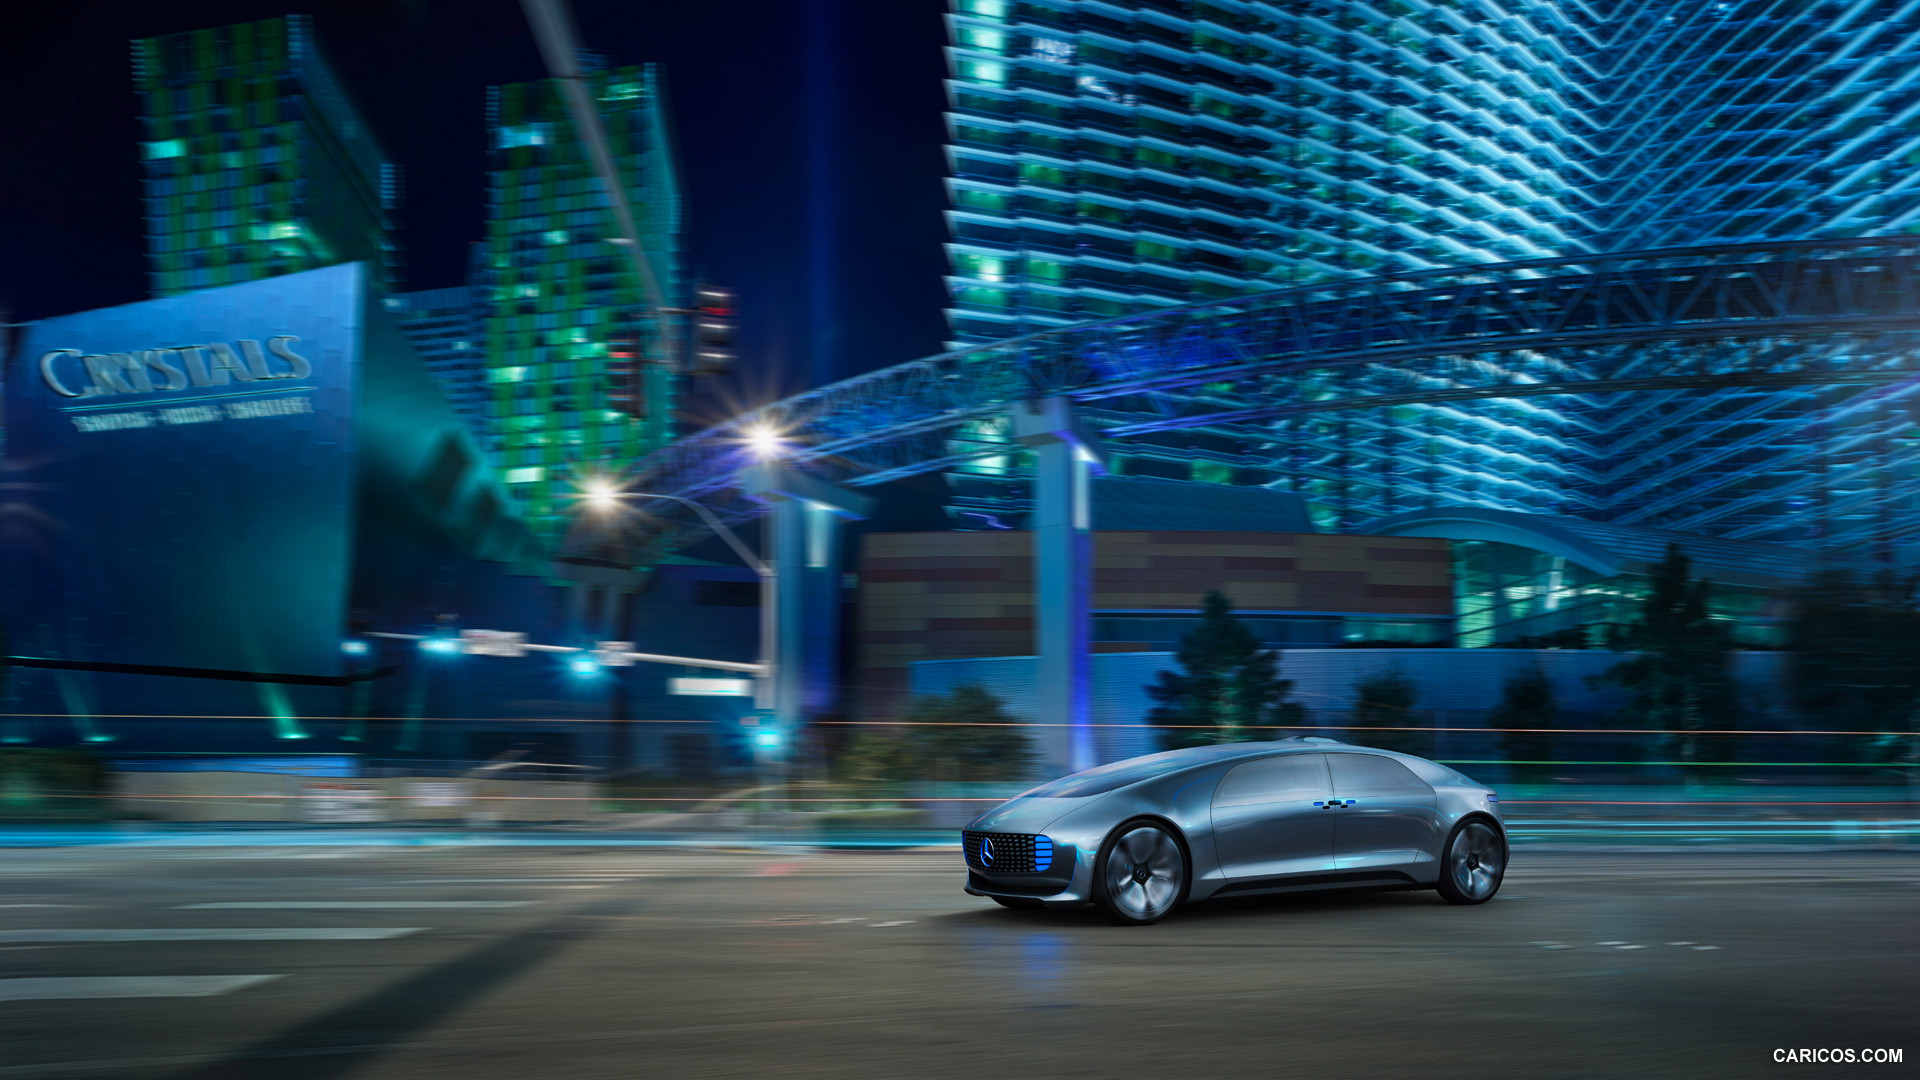 2015 Mercedes-Benz F 015 Luxury in Motion Concept  - Side, #12 of 92